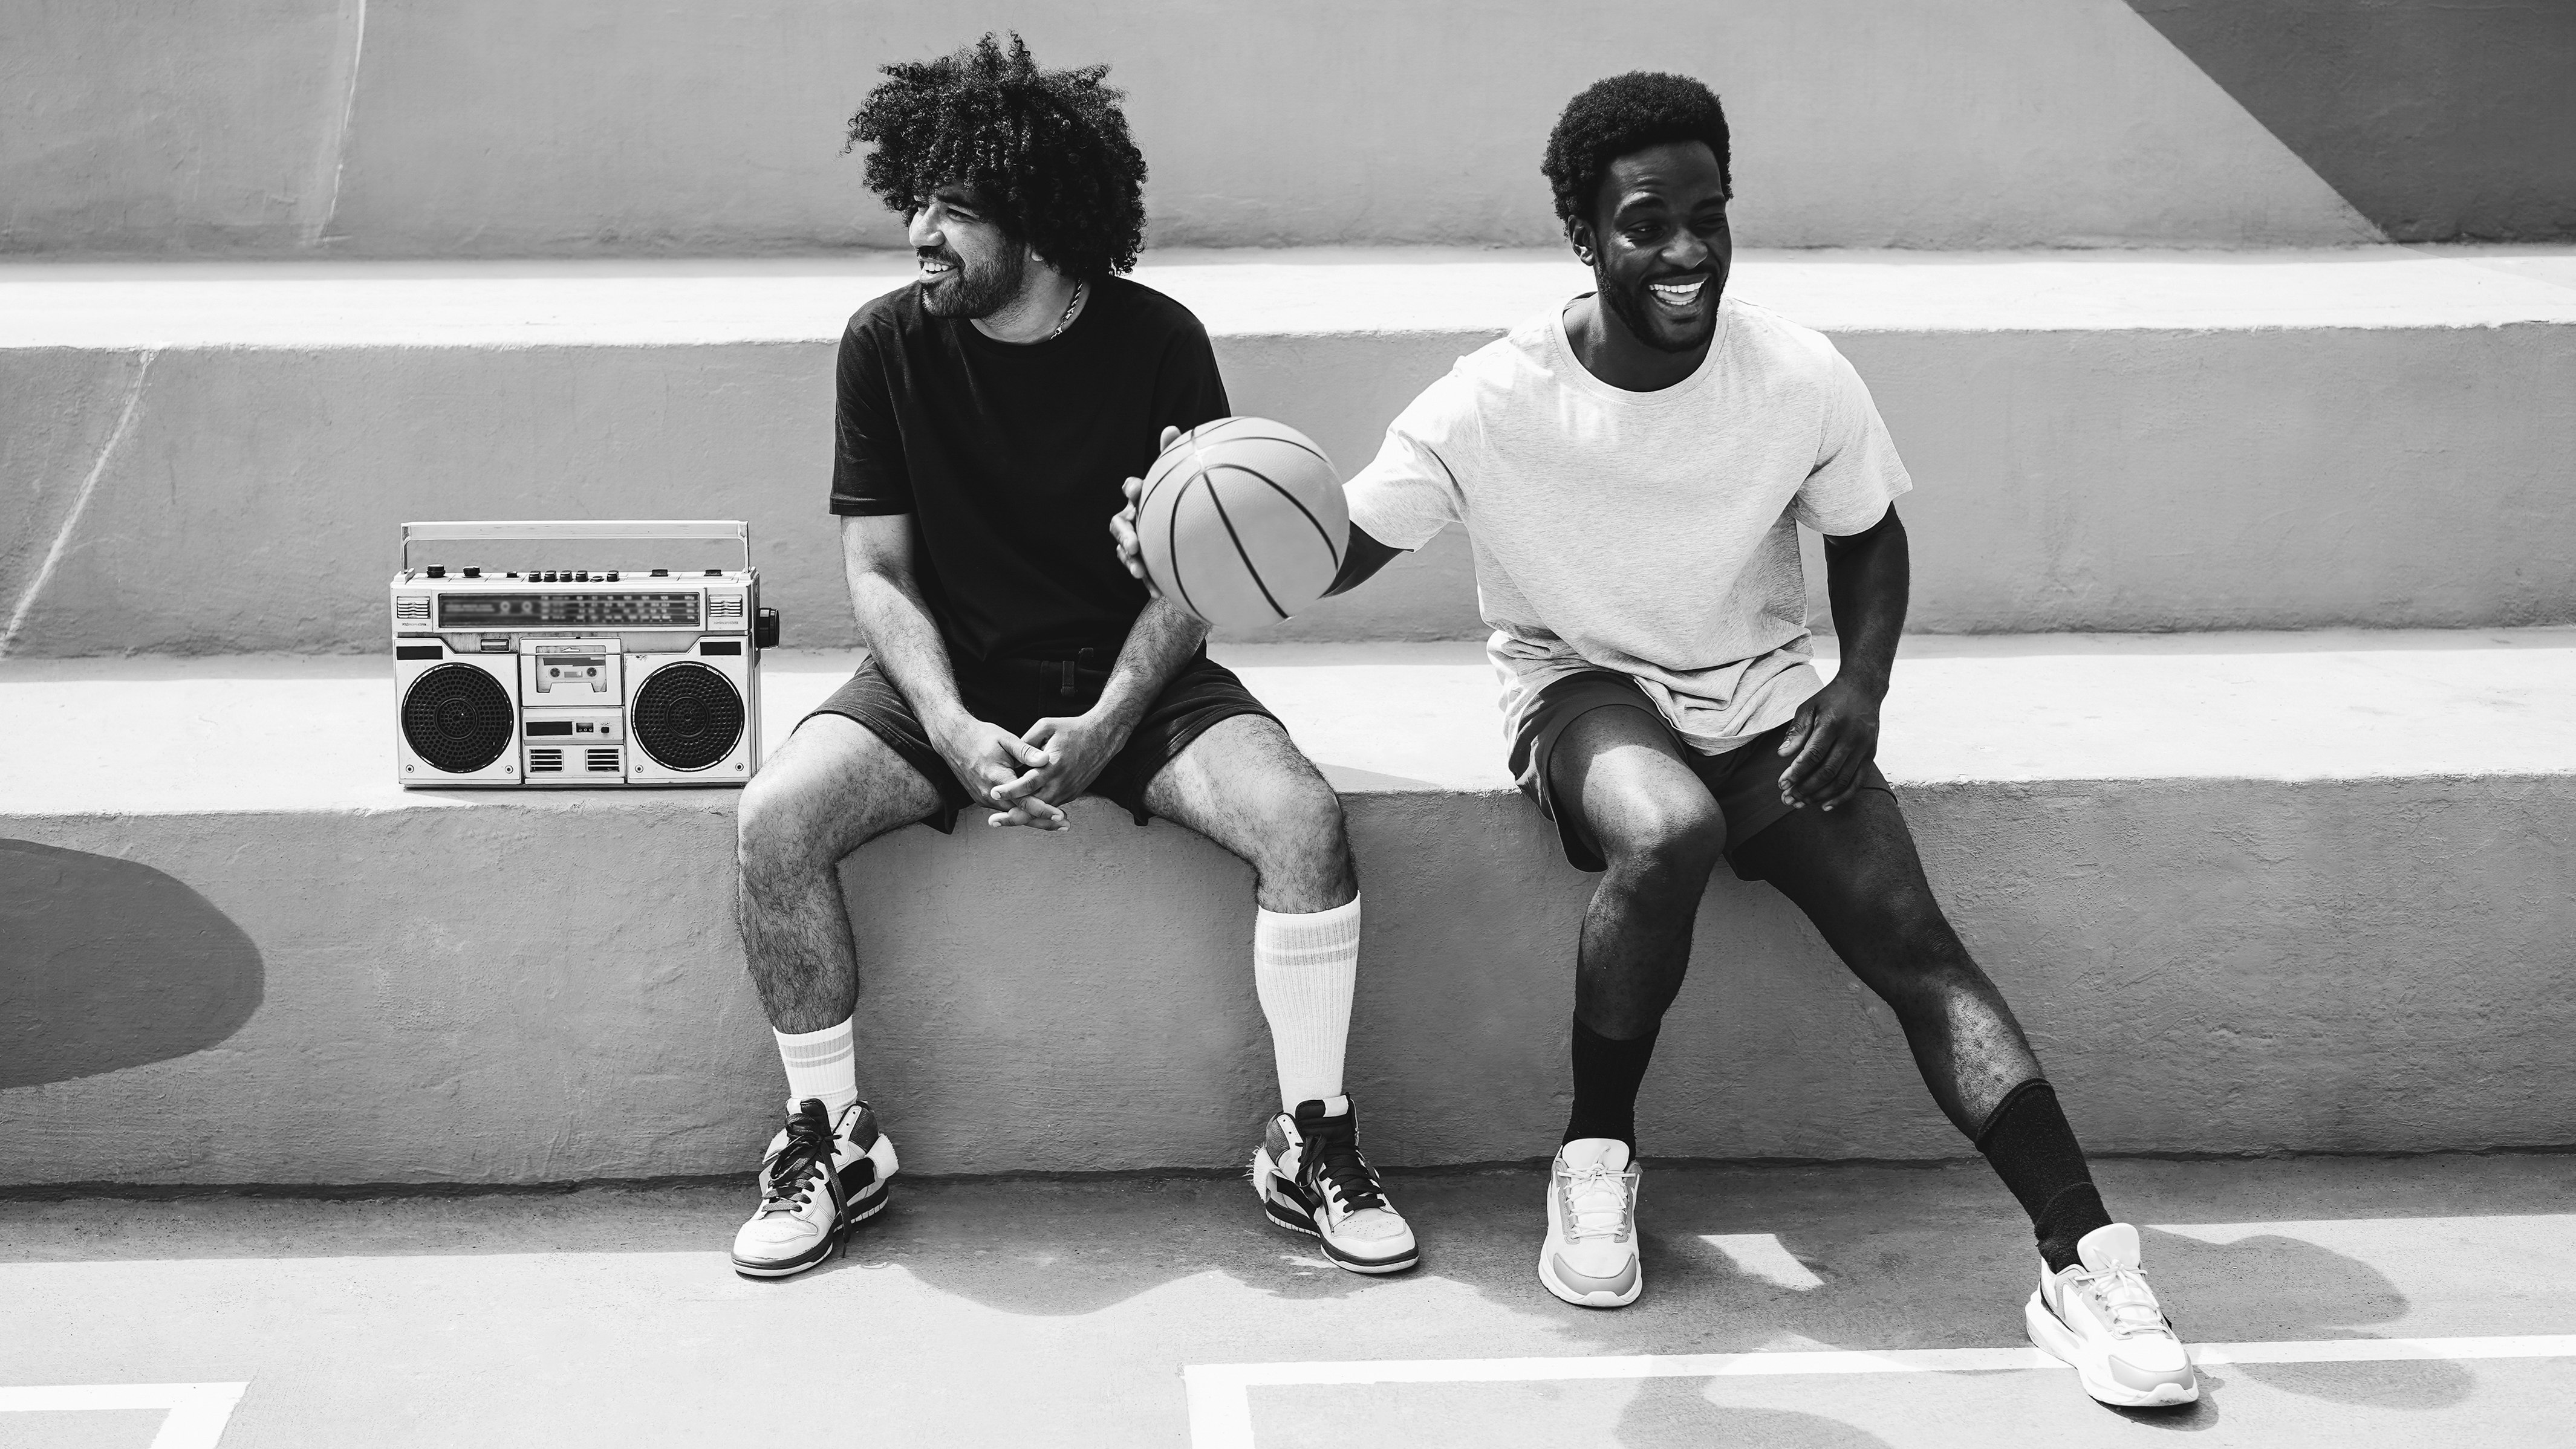 Two smiling Black men in activewear sit on concrete steps next to a boom box while one of them dribbles a basketball.